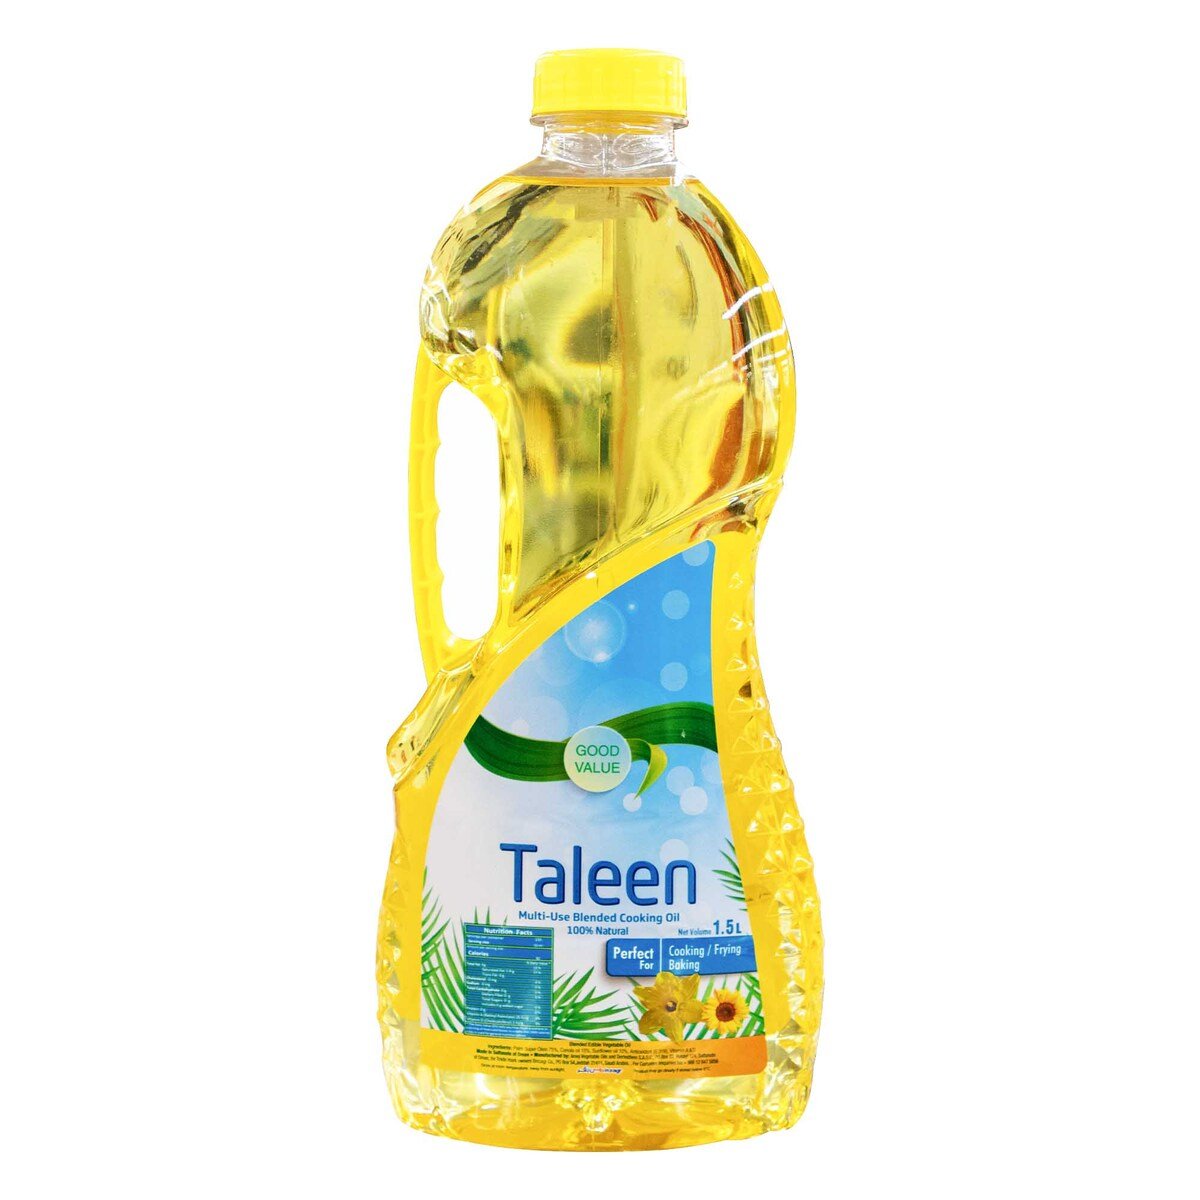 Taleen Multi Use Blended Cooking Oil 1.5 Litres